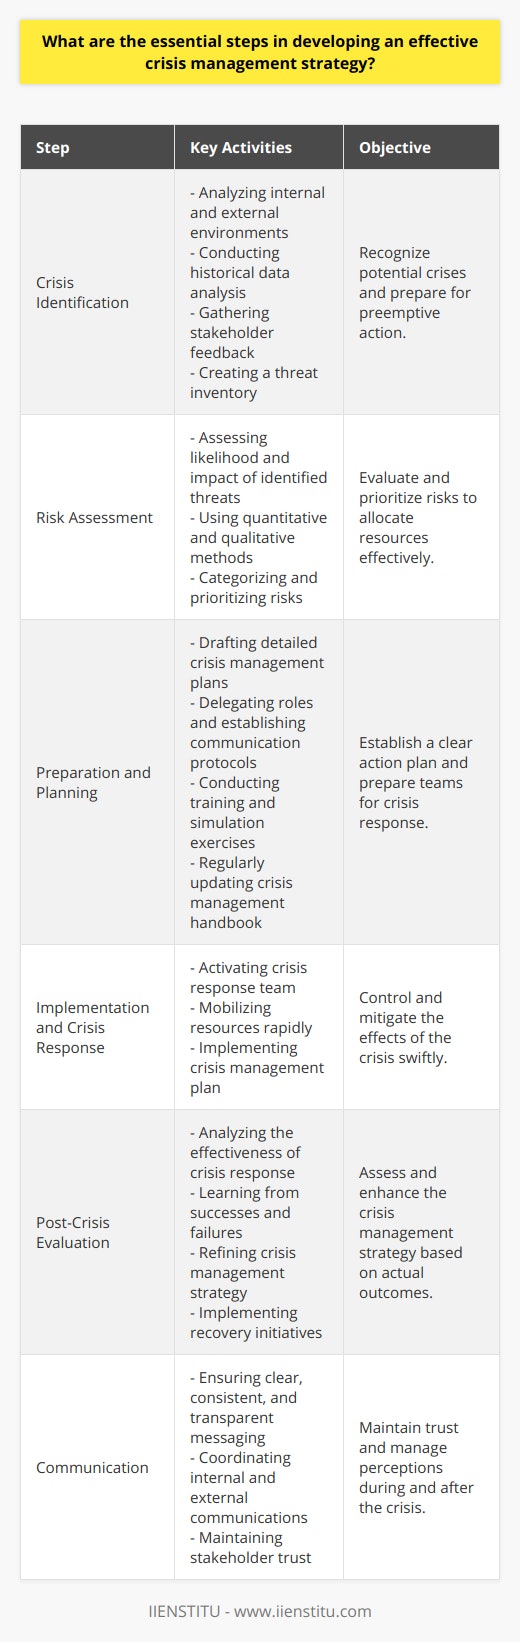 Developing an effective crisis management strategy is a crucial component of organizational resilience. To achieve this, one must adhere to a series of structured steps that guide the organization from crisis identification to post-crisis evaluation and continuous improvement. Here are the essential steps to consider:1. **Crisis Identification:**   Recognizing potential crises that an organization may face is integral to preemptive crisis management. This includes the analysis of internal processes and the external environment to detect possible disruptions, threats, and vulnerabilities that could escalate into a crisis. Identifying these risks requires a mix of foresight, historical data analysis, and stakeholder feedback to create a comprehensive threat inventory.2. **Risk Assessment:**   Once potential crises are identified, assessing the risks associated with each item on the threat inventory becomes essential. This assessment needs to determine the likelihood of each potential crisis, its potential severity, and the potential impact on the organization. Quantitative and qualitative methods can be applied to categorize and prioritize risks, thus allowing organizations to allocate resources and attention optimally.3. **Preparation and Planning:**   Preparation is the cornerstone of effective crisis management. Detailed crisis management plans are crafted, outlining specific actions, delegating roles and responsibilities, and setting clear communication protocols. These plans are typically documented in a crisis management handbook or digital platform, which is regularly updated to reflect changing conditions. Additionally, training and simulation exercises are vital, as they condition personnel to respond effectively under crisis conditions.4. **Implementation and Crisis Response:**   Once a crisis strikes, swift implementation of the developed crisis management plan is critical. The organization’s crisis response team must take immediate action to control and mitigate the effects of the crisis. Quick mobilization of resources — be they human, technical, or financial — can help contain the crisis and minimize damage.5. **Post-Crisis Evaluation:**   After a crisis has been managed, a rigorous assessment should follow. This post-crisis evaluation involves analyzing the crisis response's success and determining what worked well and what didn't. Through this process, lessons are learned, and the crisis management strategy is refined. During this phase, the organization should also implement recovery initiatives to restore operations and reputation.6. **Communication:**   Throughout the cycle of crisis management, clear, consistent, and transparent communication is paramount. This pertains not only to internal communication among staff but also to external communication with stakeholders like customers, suppliers, regulators, and the media. The way an organization communicates during a crisis can profoundly affect stakeholder trust and the subsequent recovery phase.Execution of these steps requires an organization to remain agile and ready to evolve its crisis management protocols as new risks emerge and as lessons are learned from past crises. By iterating through identification, assessment, planning, response, evaluation, and communication, an organization can establish a dynamic and robust crisis management strategy that safeguards its interests and ensures its long-term sustainability and reputation.